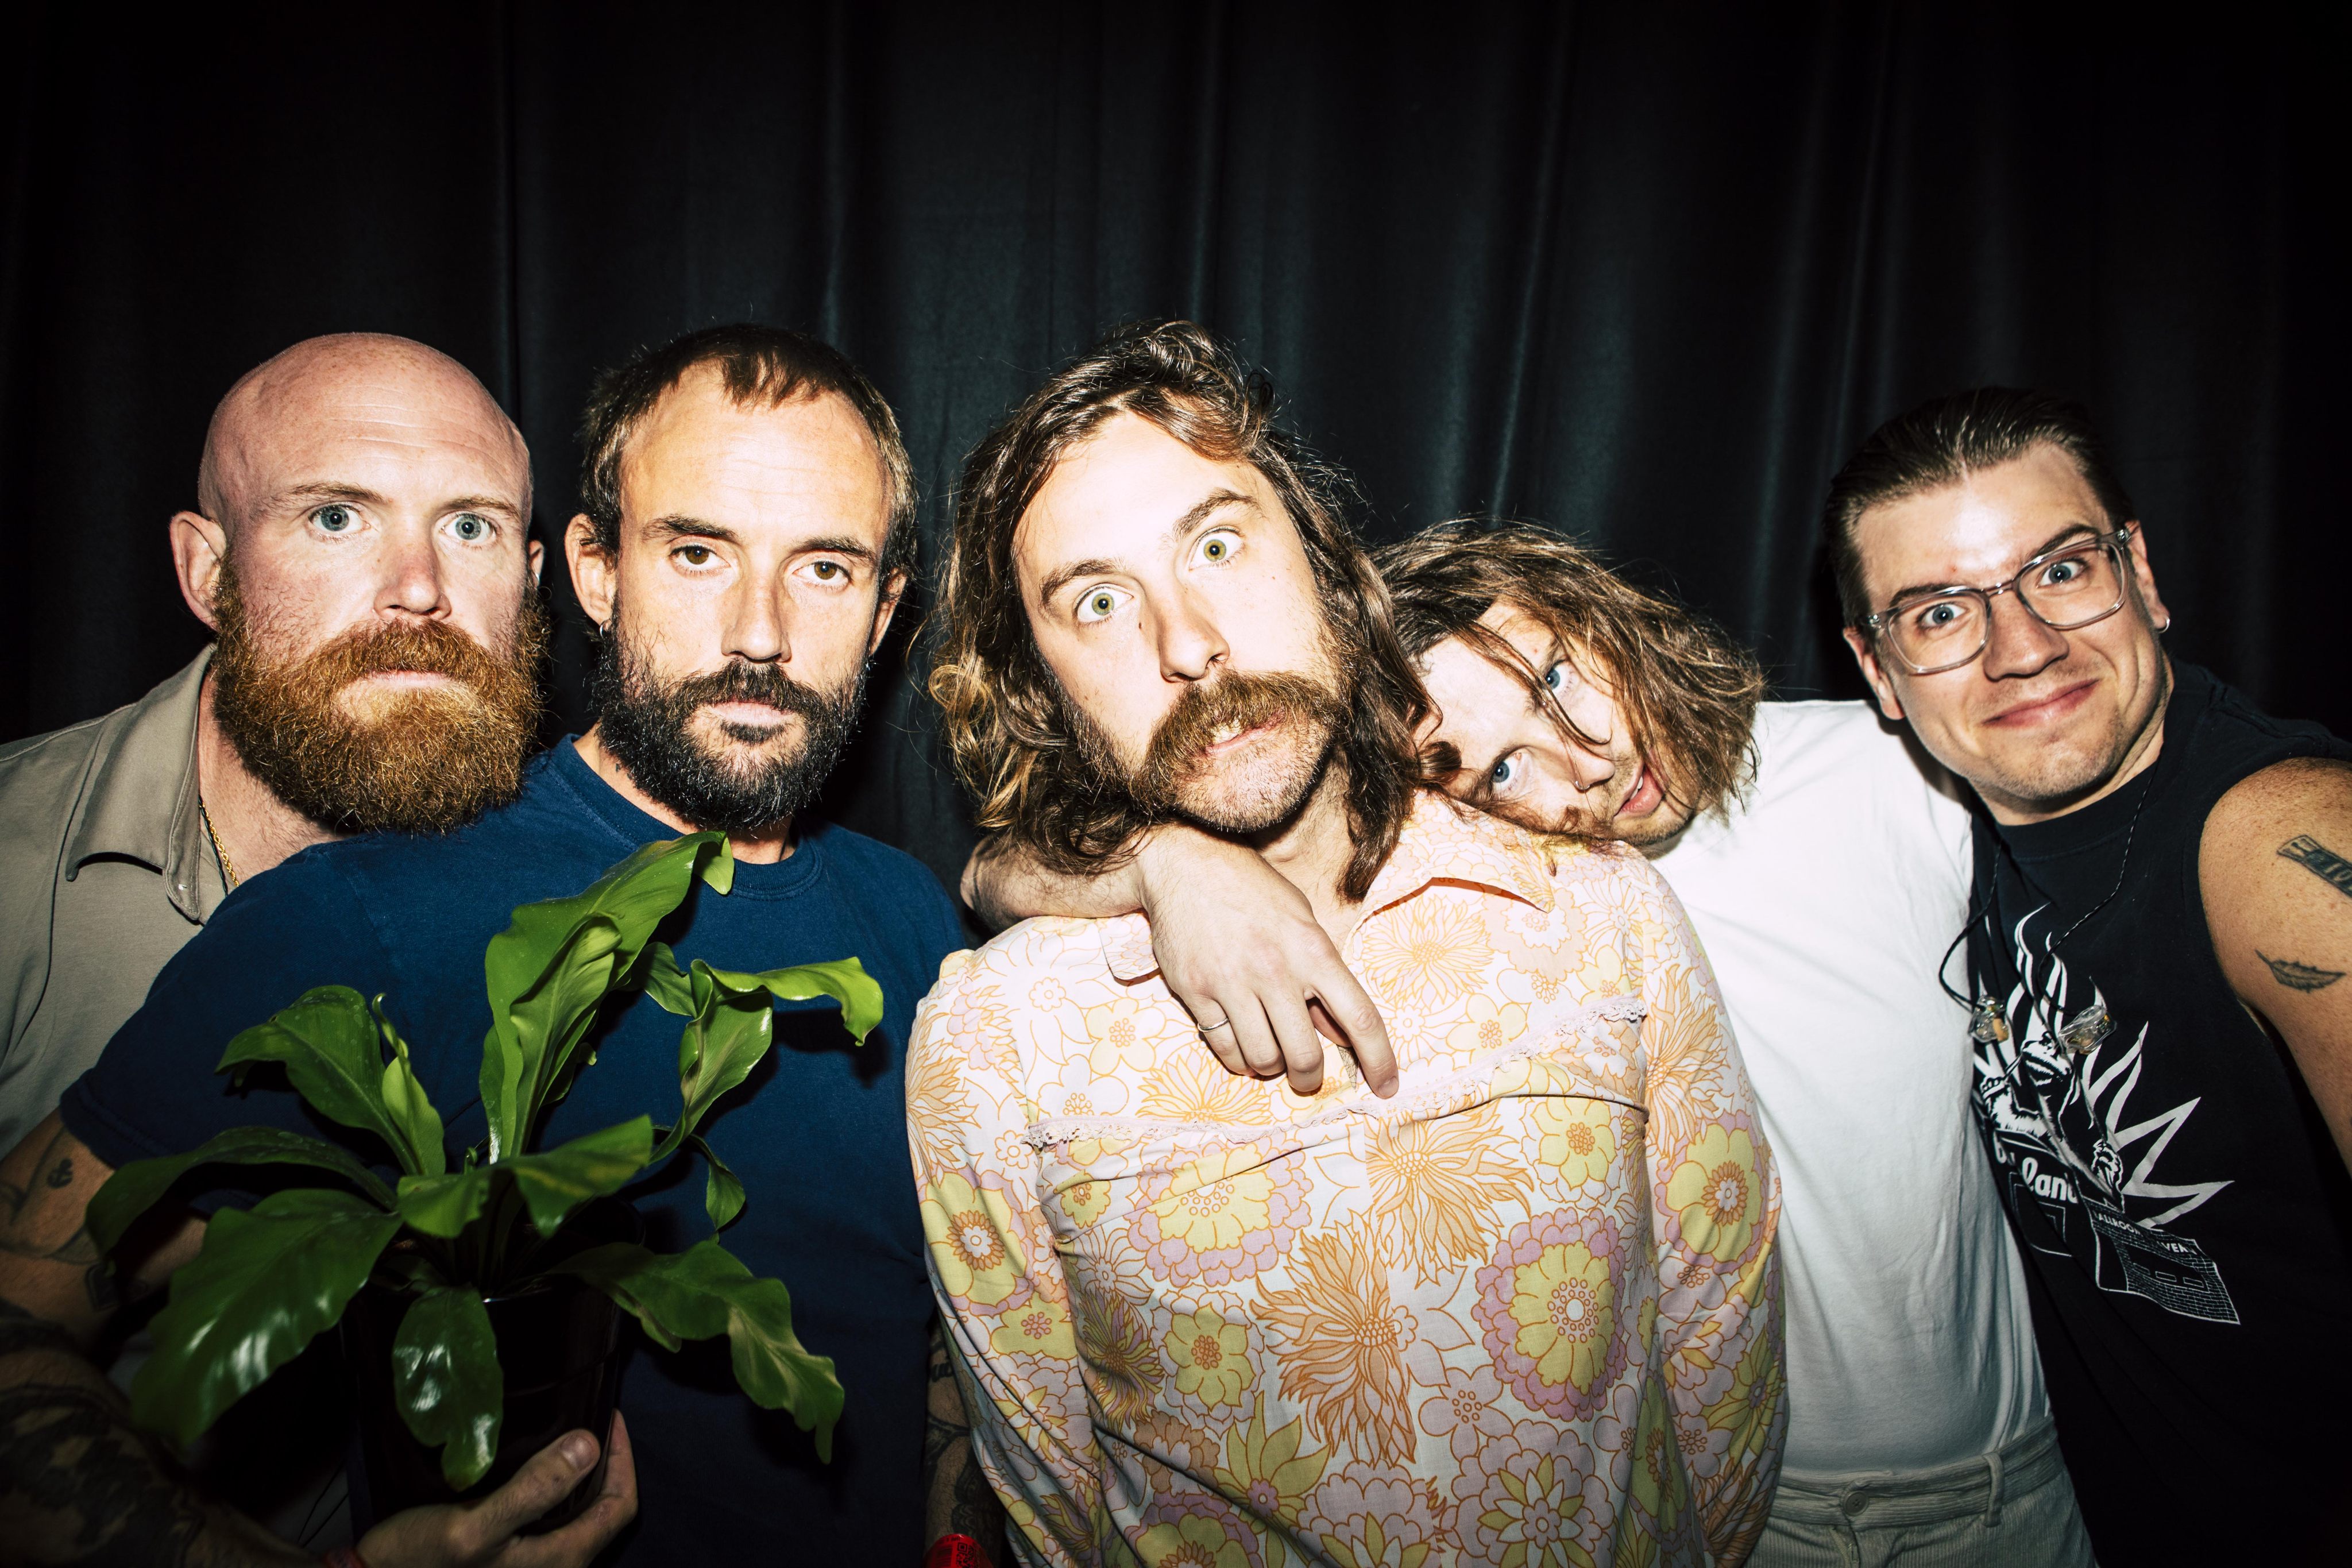 IDLES, formed in Bristol, is a British post-punk powerhouse and a fan favourite that is sure to rock up a storm at Central Harbourfront this December. Photo: Clockenflap